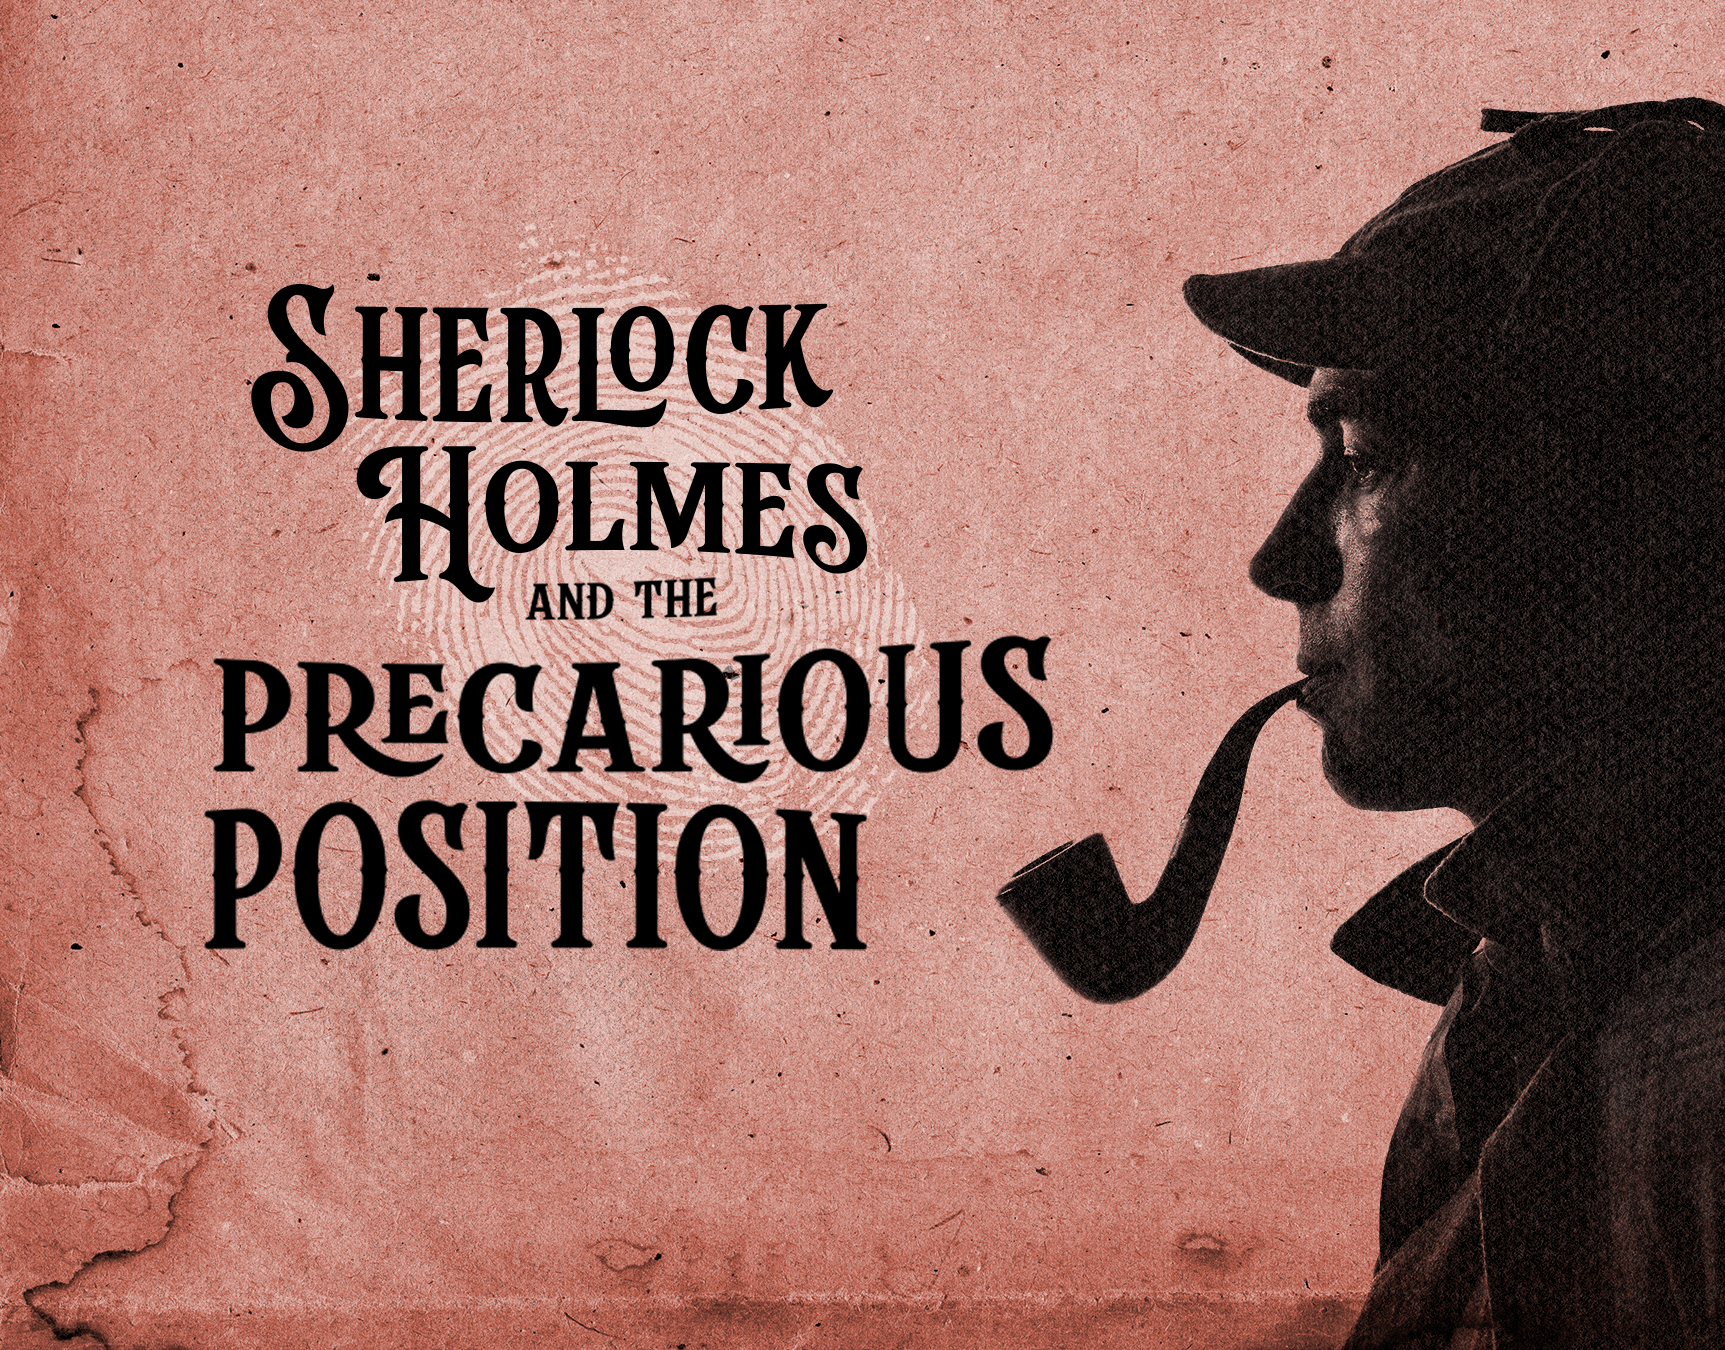 Title art for Sherlock Holmes and the Precarious position, featuring a young male model in profile posing as Holmes in deerstalker cap and meerschaum pipe. He is nearly in silhouette against a stained pink background.